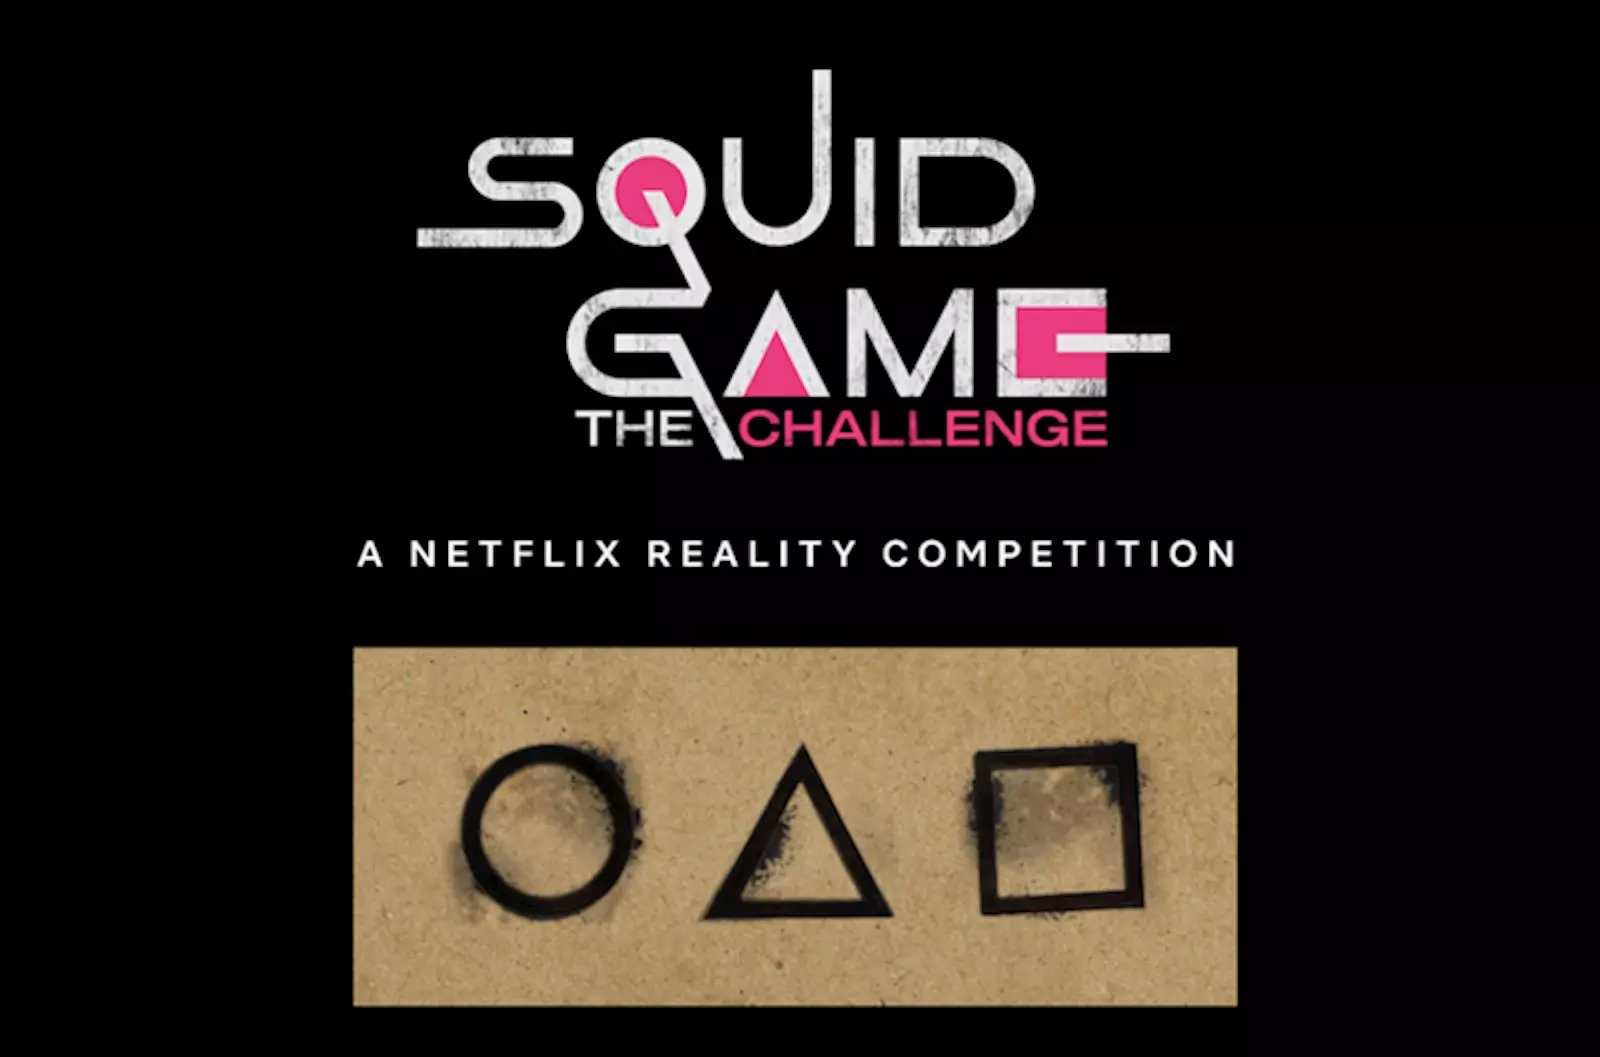 What Is Netflix's 'Squid Game' Really About?